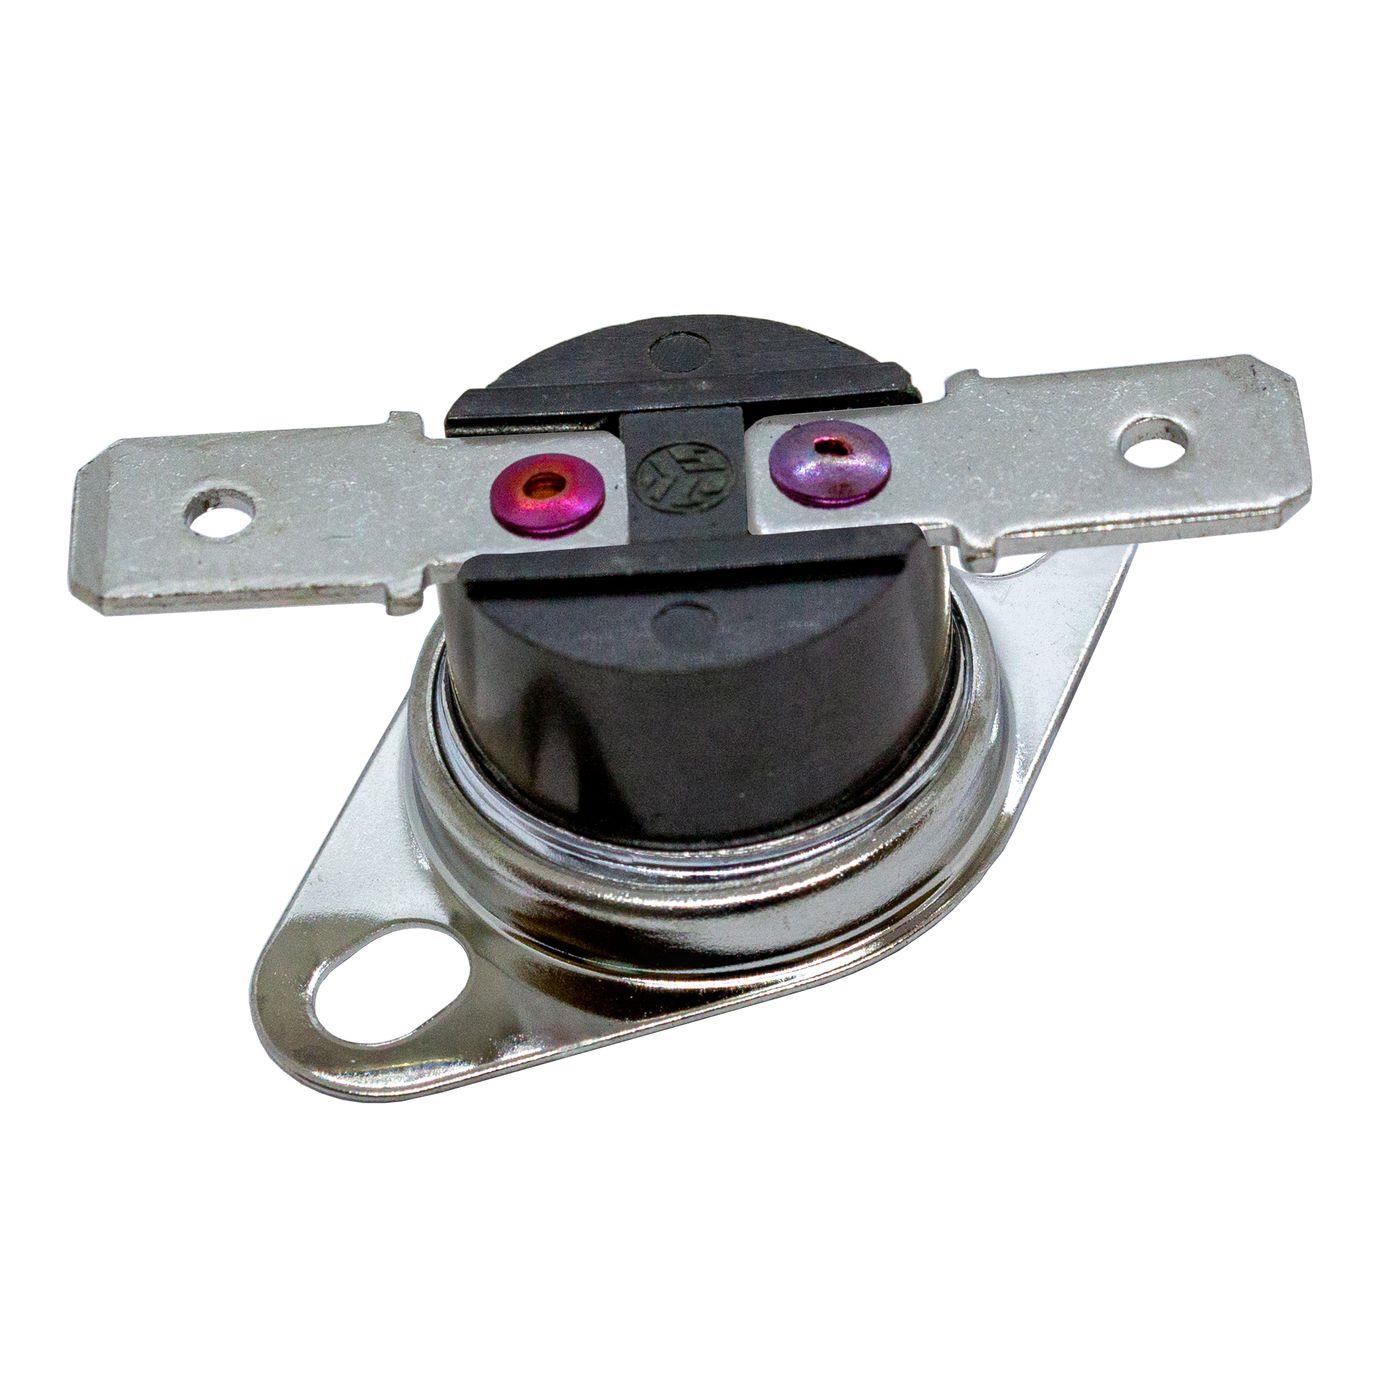 Thermal switch 65°C NO contact 250V 10A Temperature switch thermostat KSD301 Bimetal Thermal protection